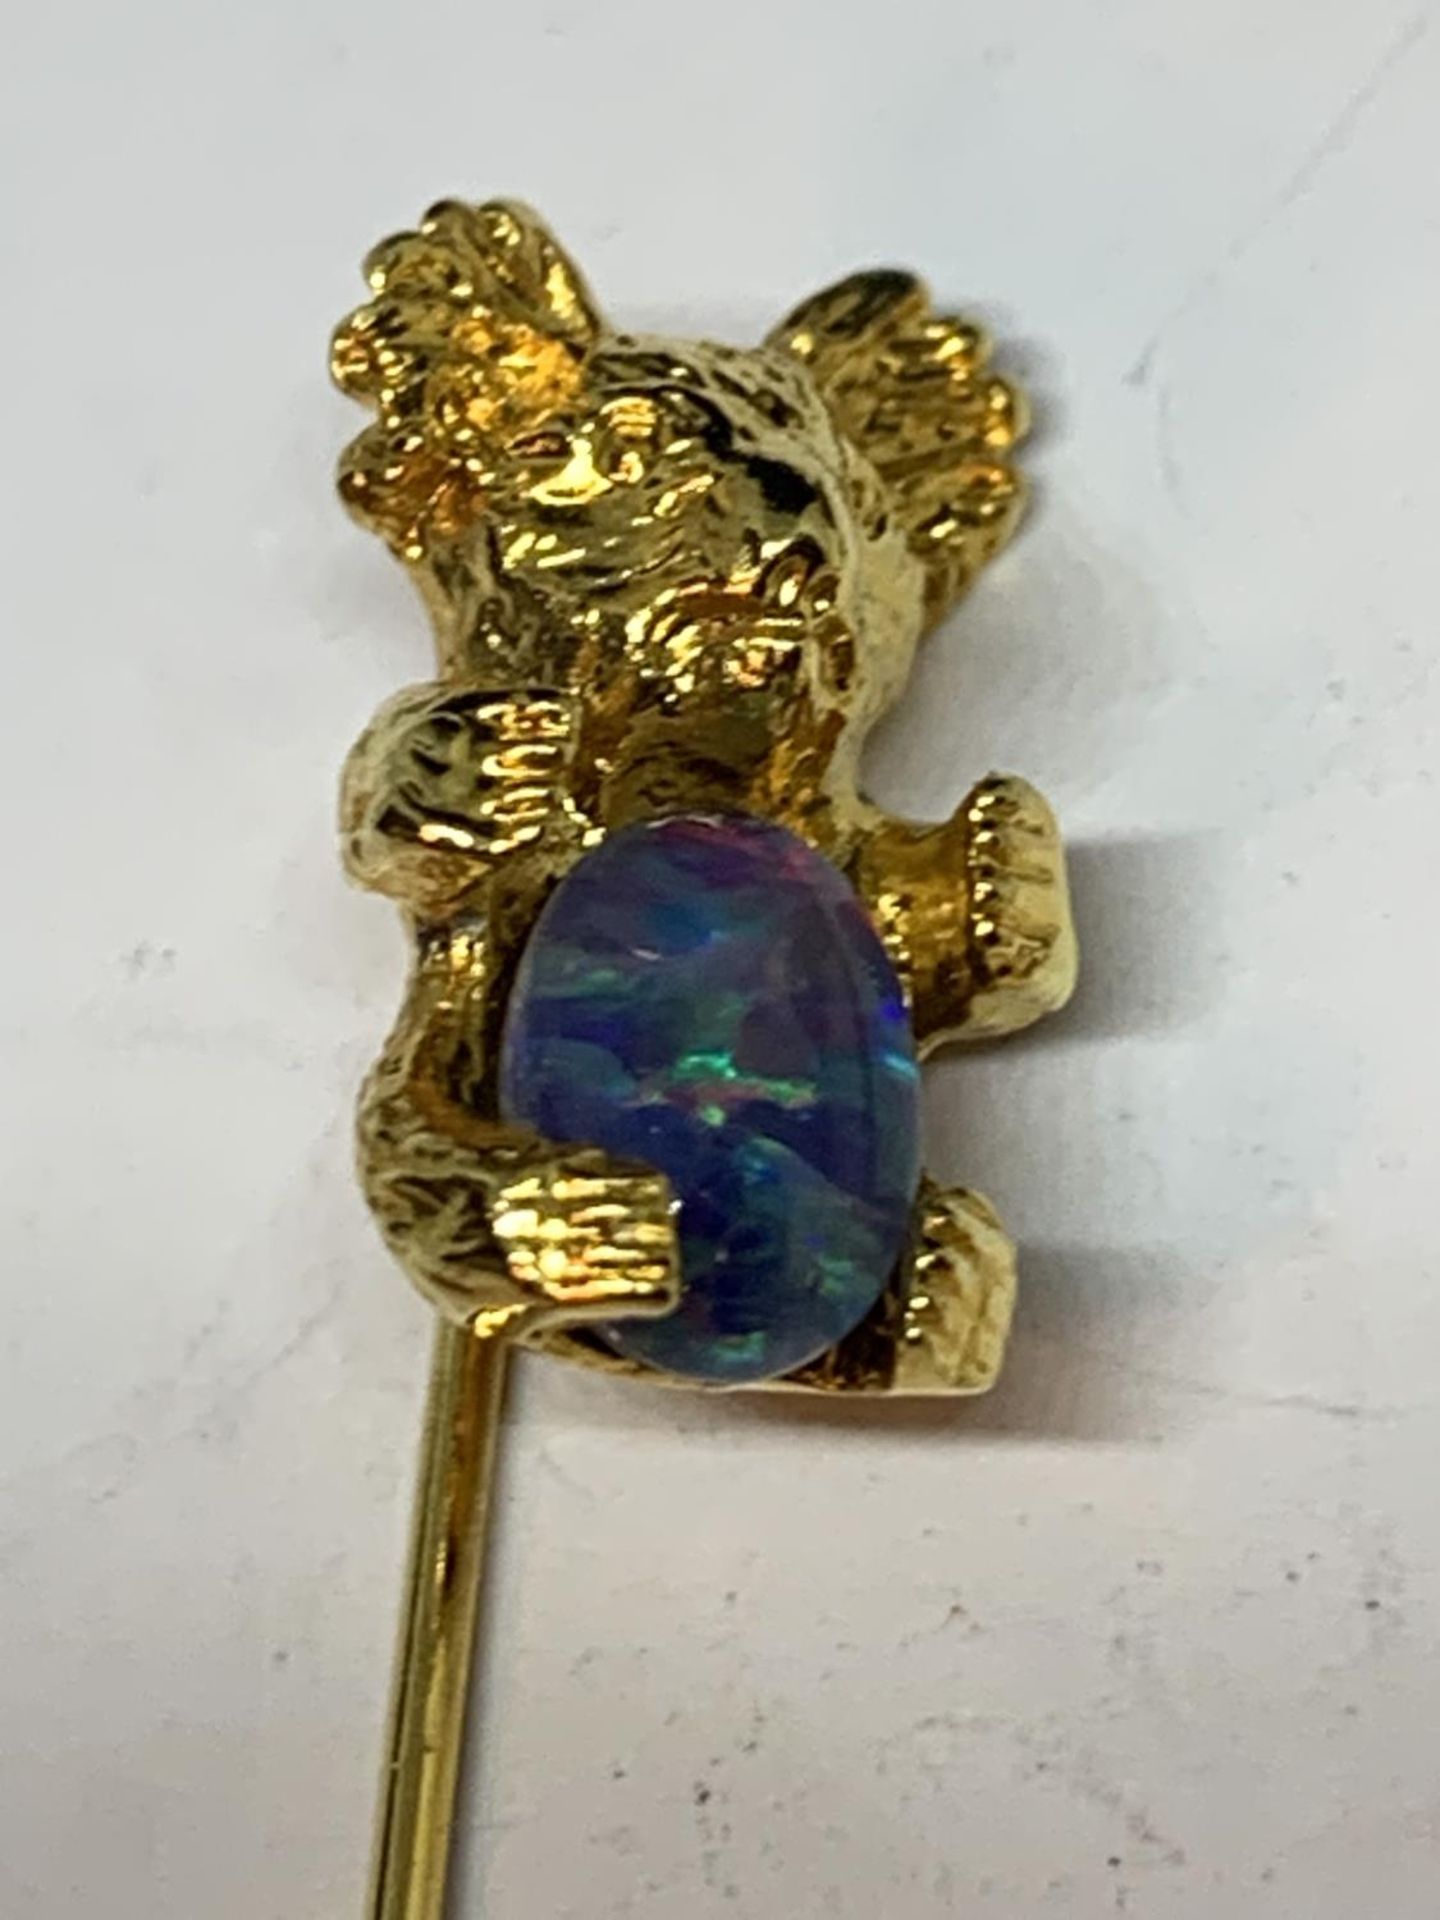 TWO PIN BROOCHES ONE WITH A TEDDY AND OPAL COLOURED STONE - Image 2 of 4